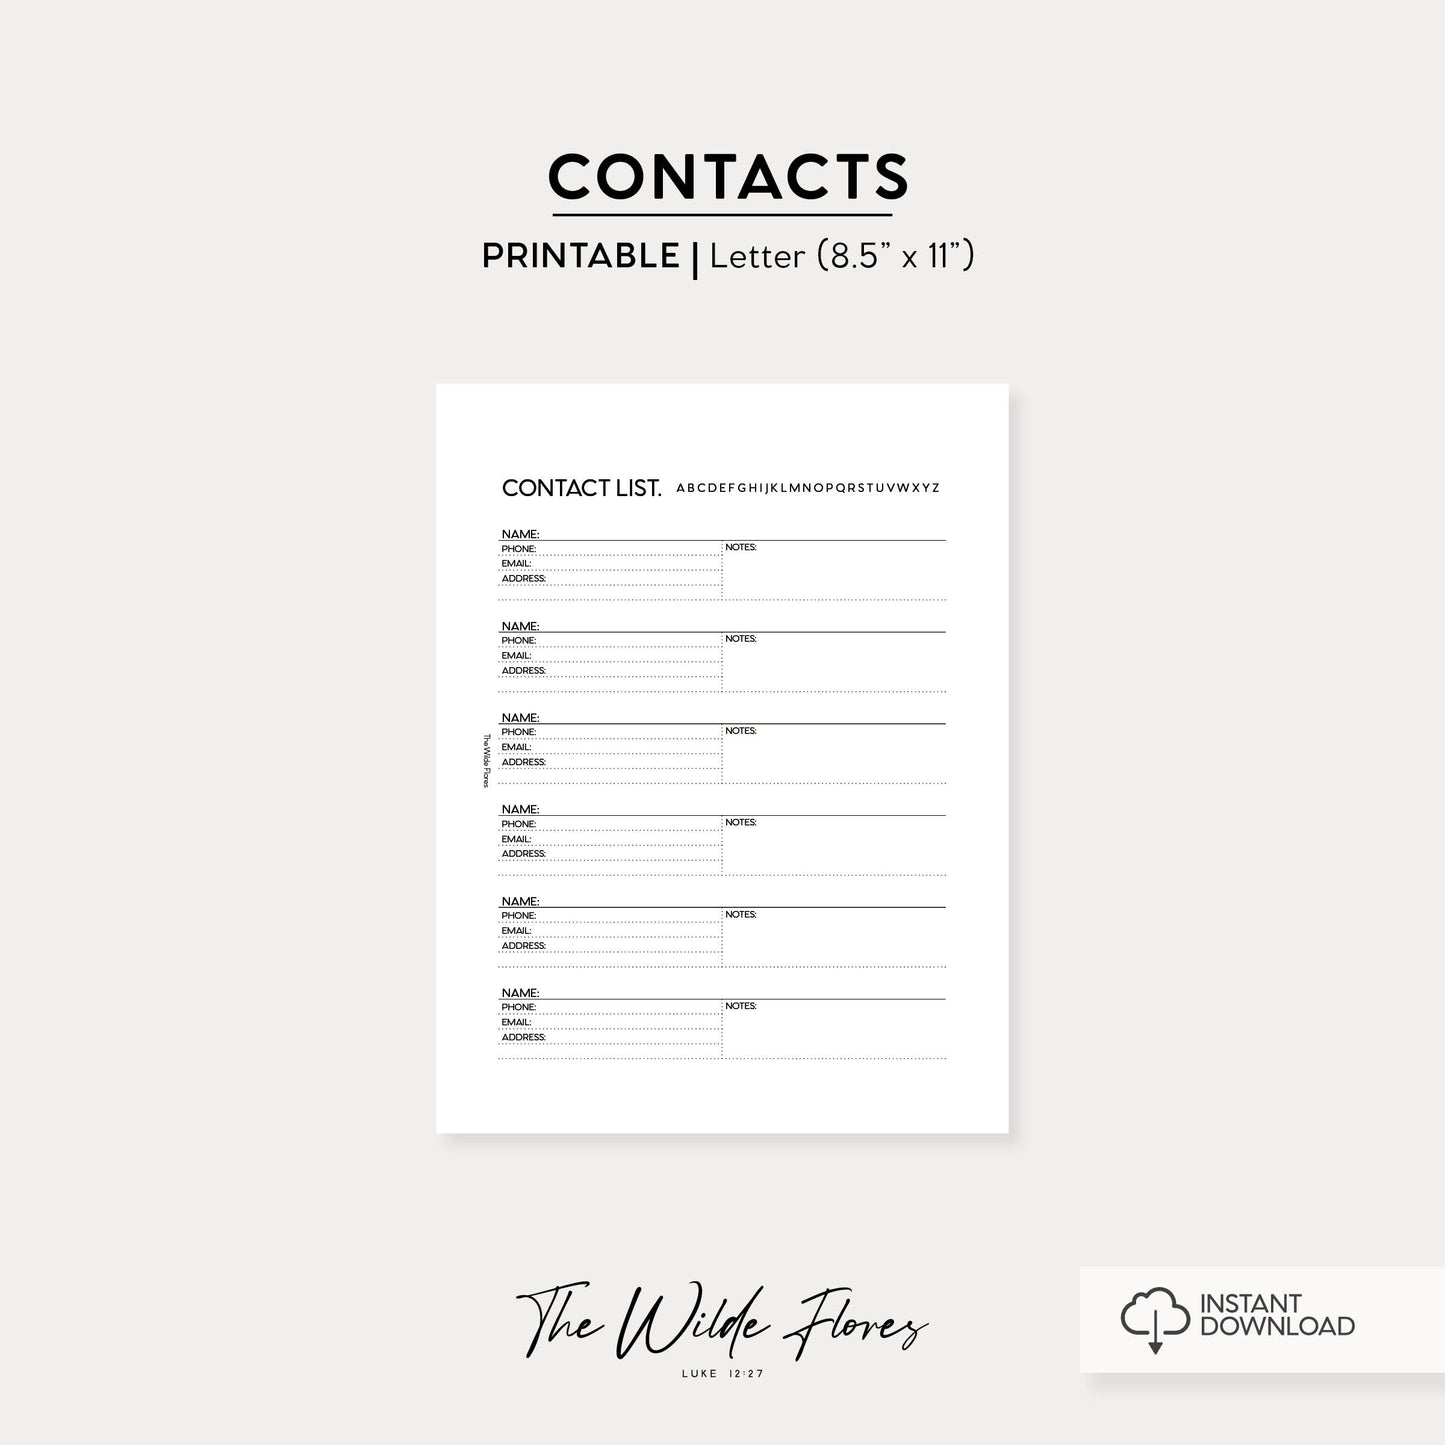 Contacts: Letter Size Printable